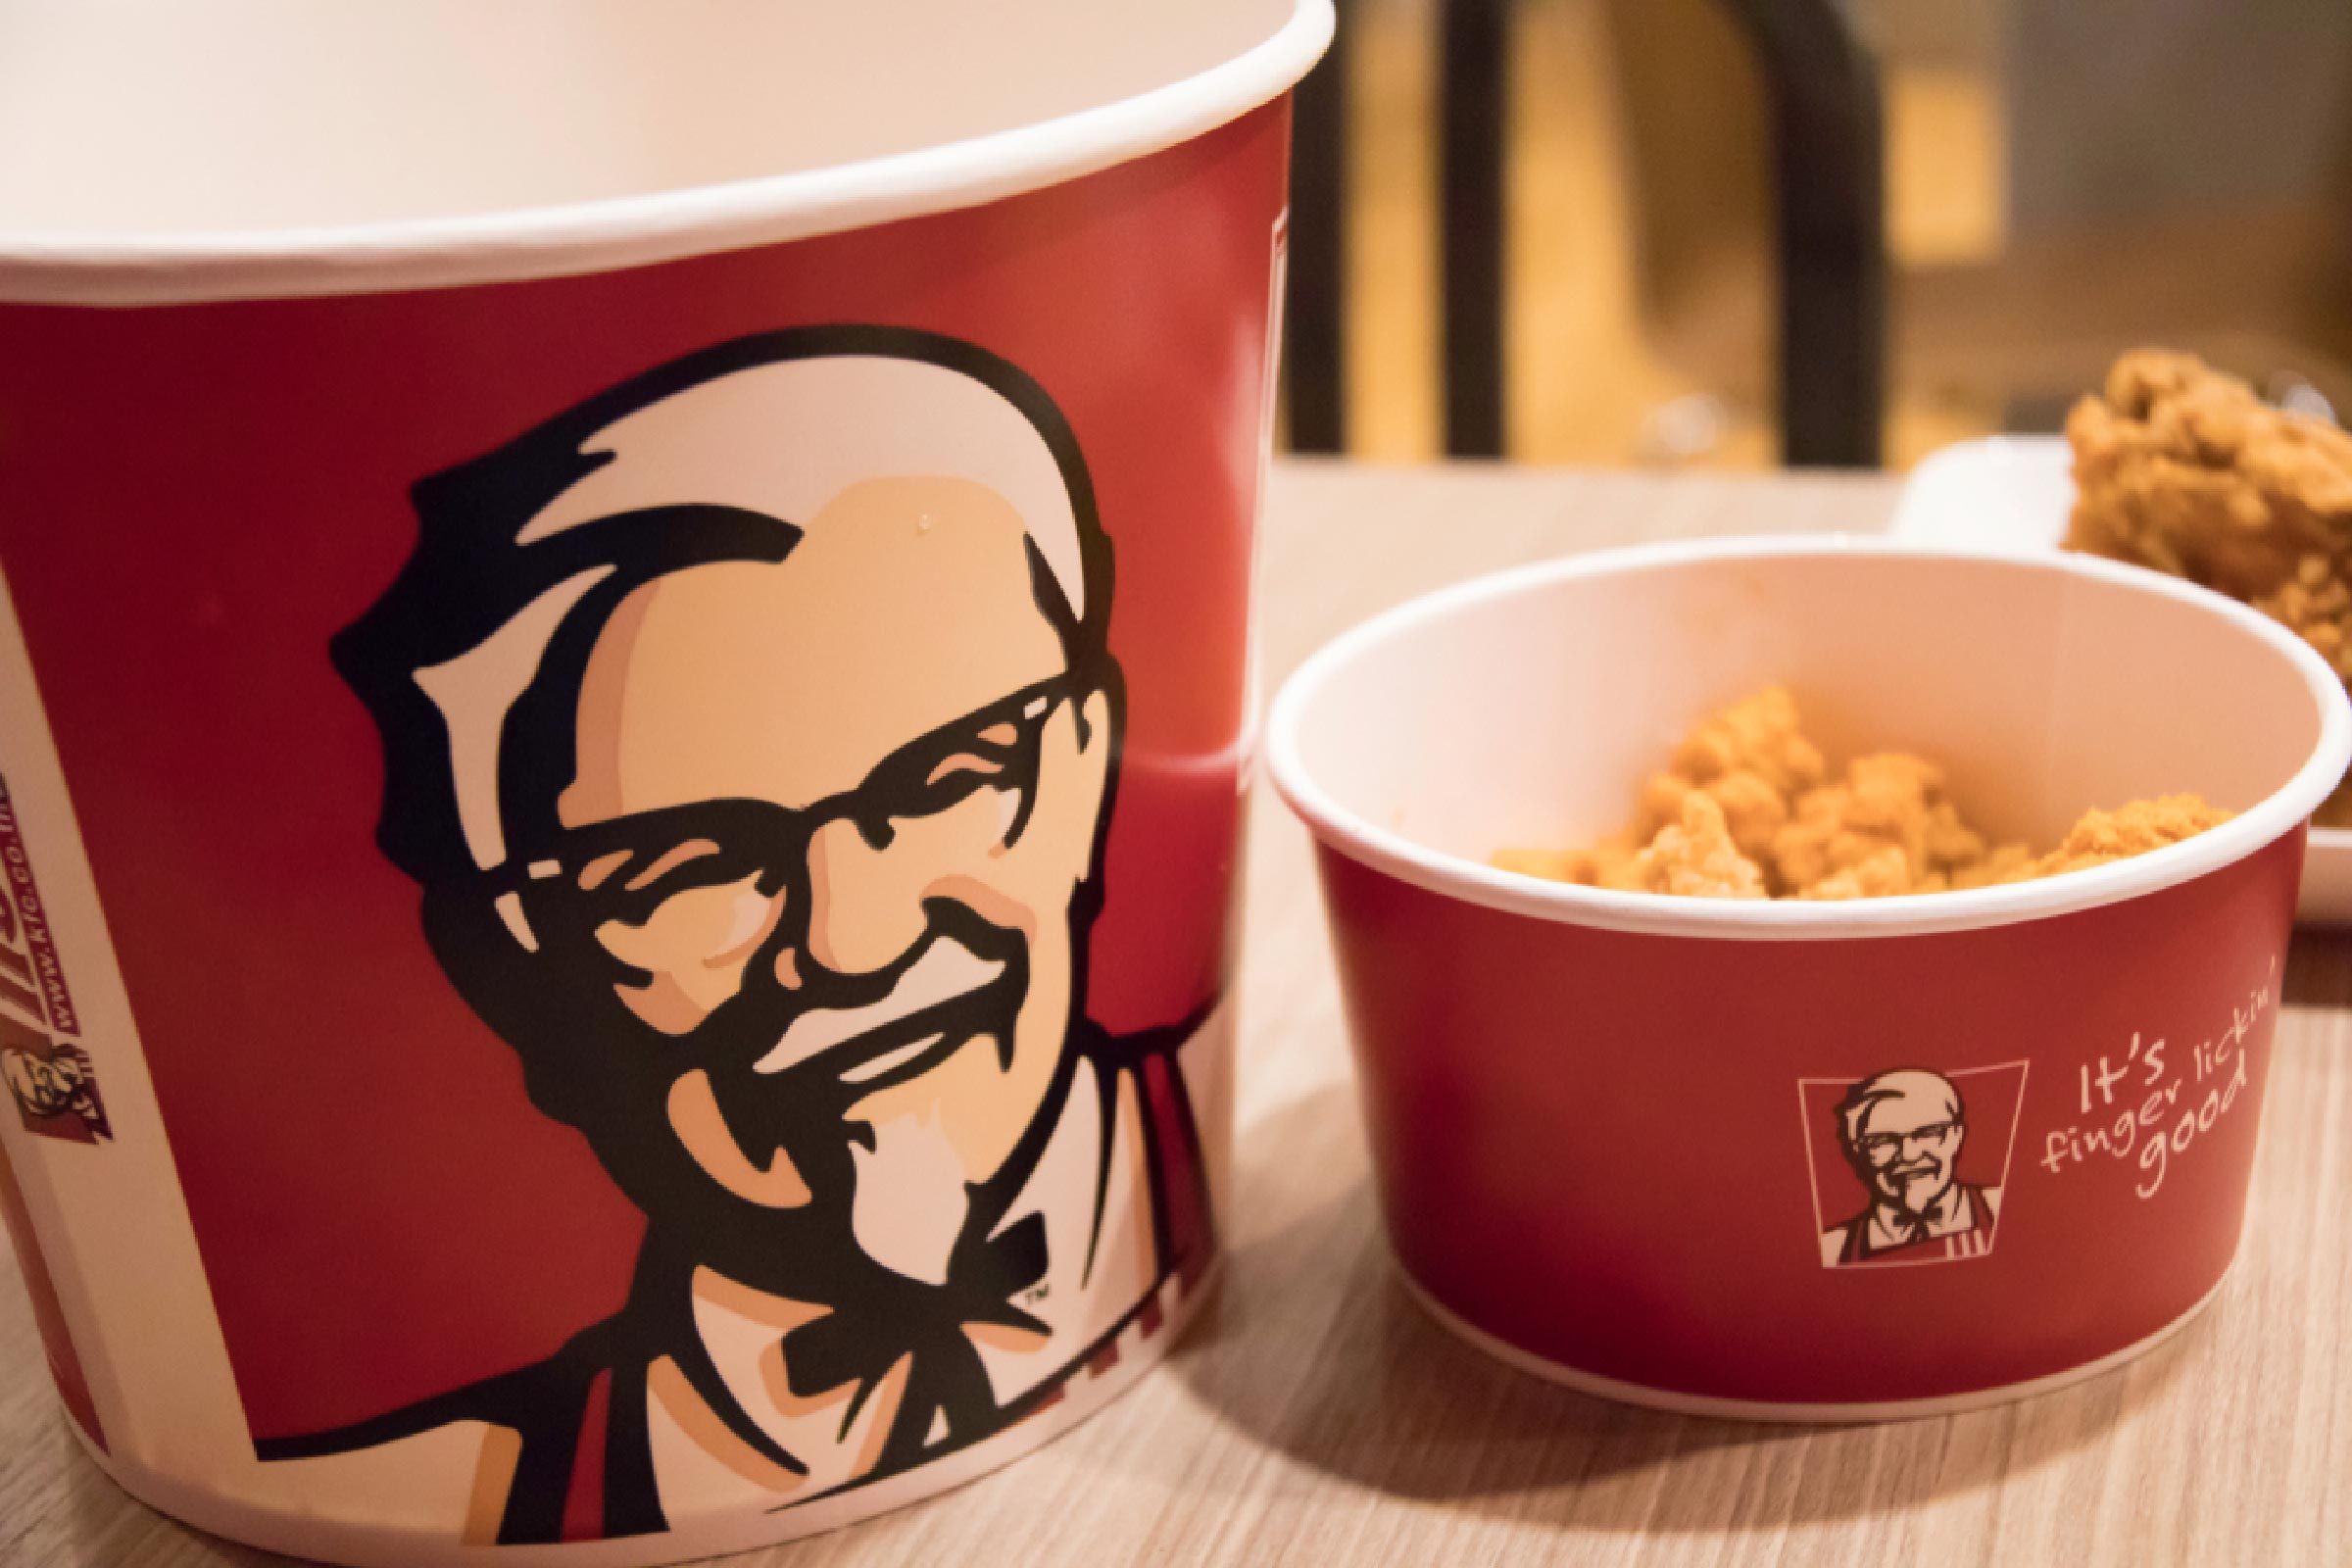 Why Kentucky Fried Chicken Changed Its Name to KFC | Reader's Digest